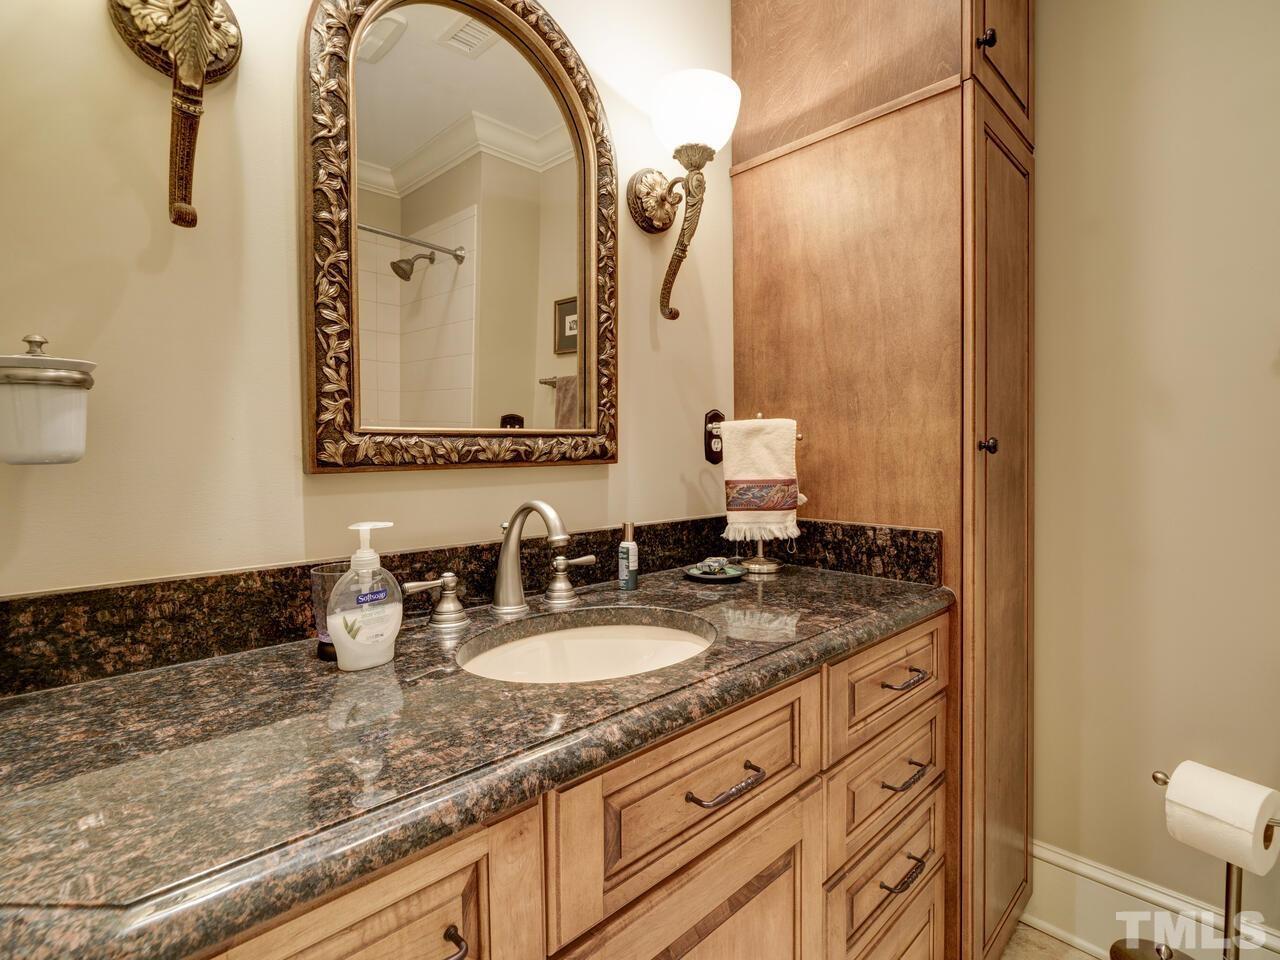 The Powder Room has a faux finish on the walls.